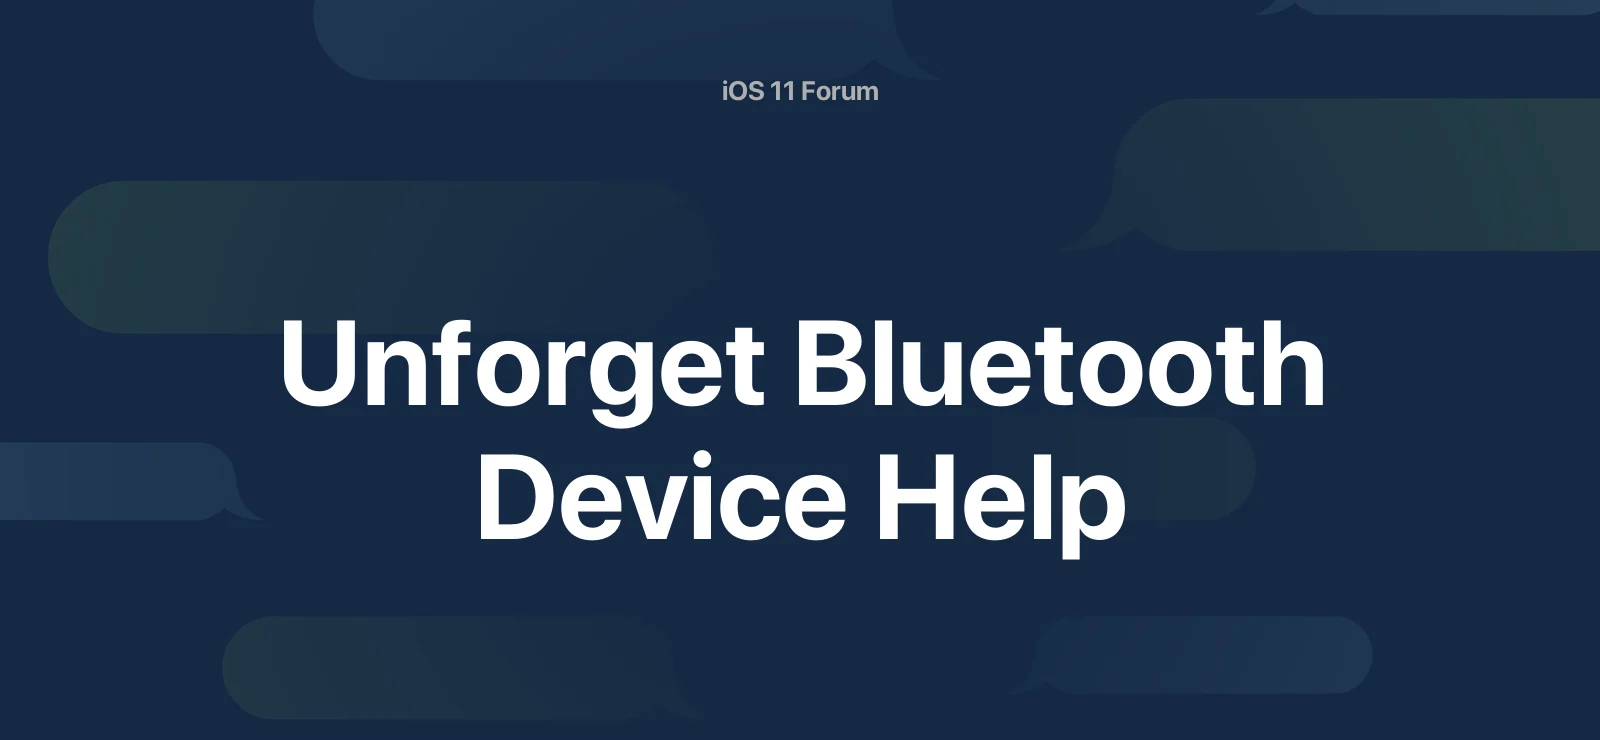 how to unforget bluetooth device iphone